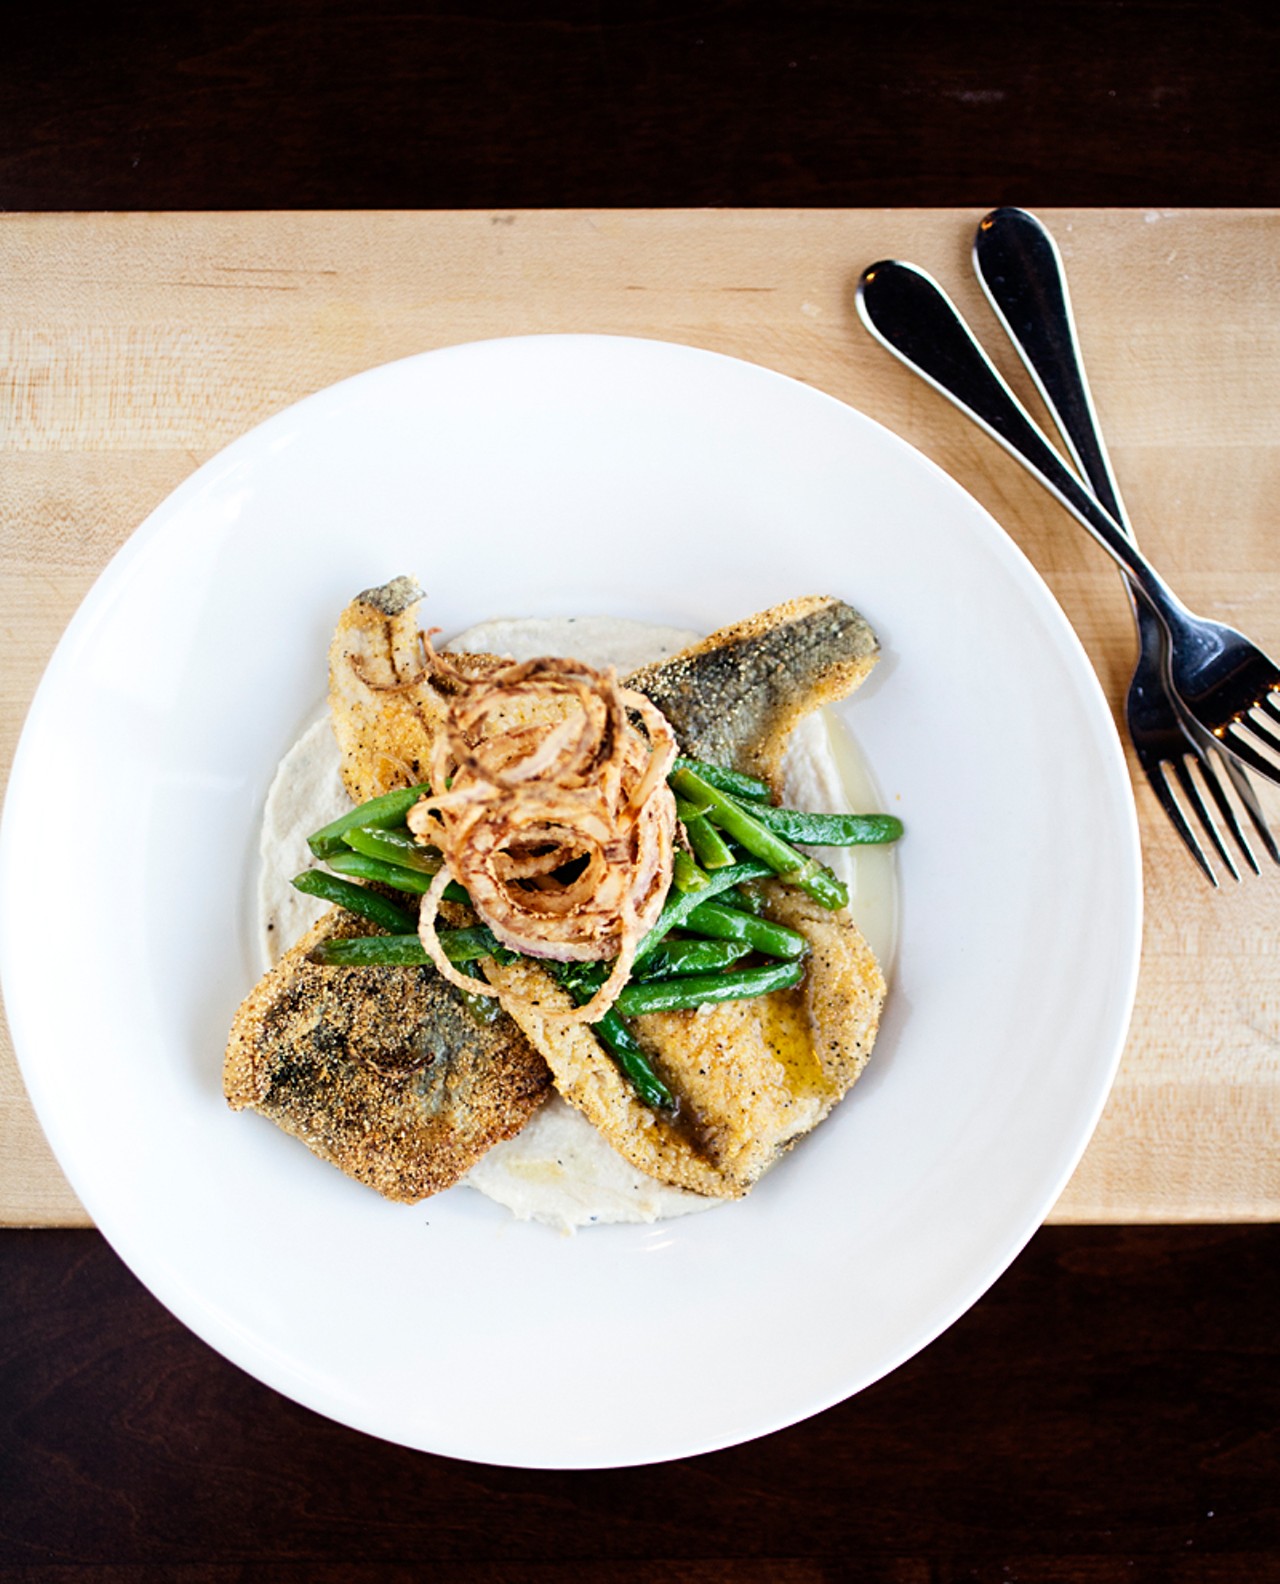 The Missouri trout at the Block is cornmeal-encrusted with roasted cauliflower, green beans, crispy onions and herb butter.